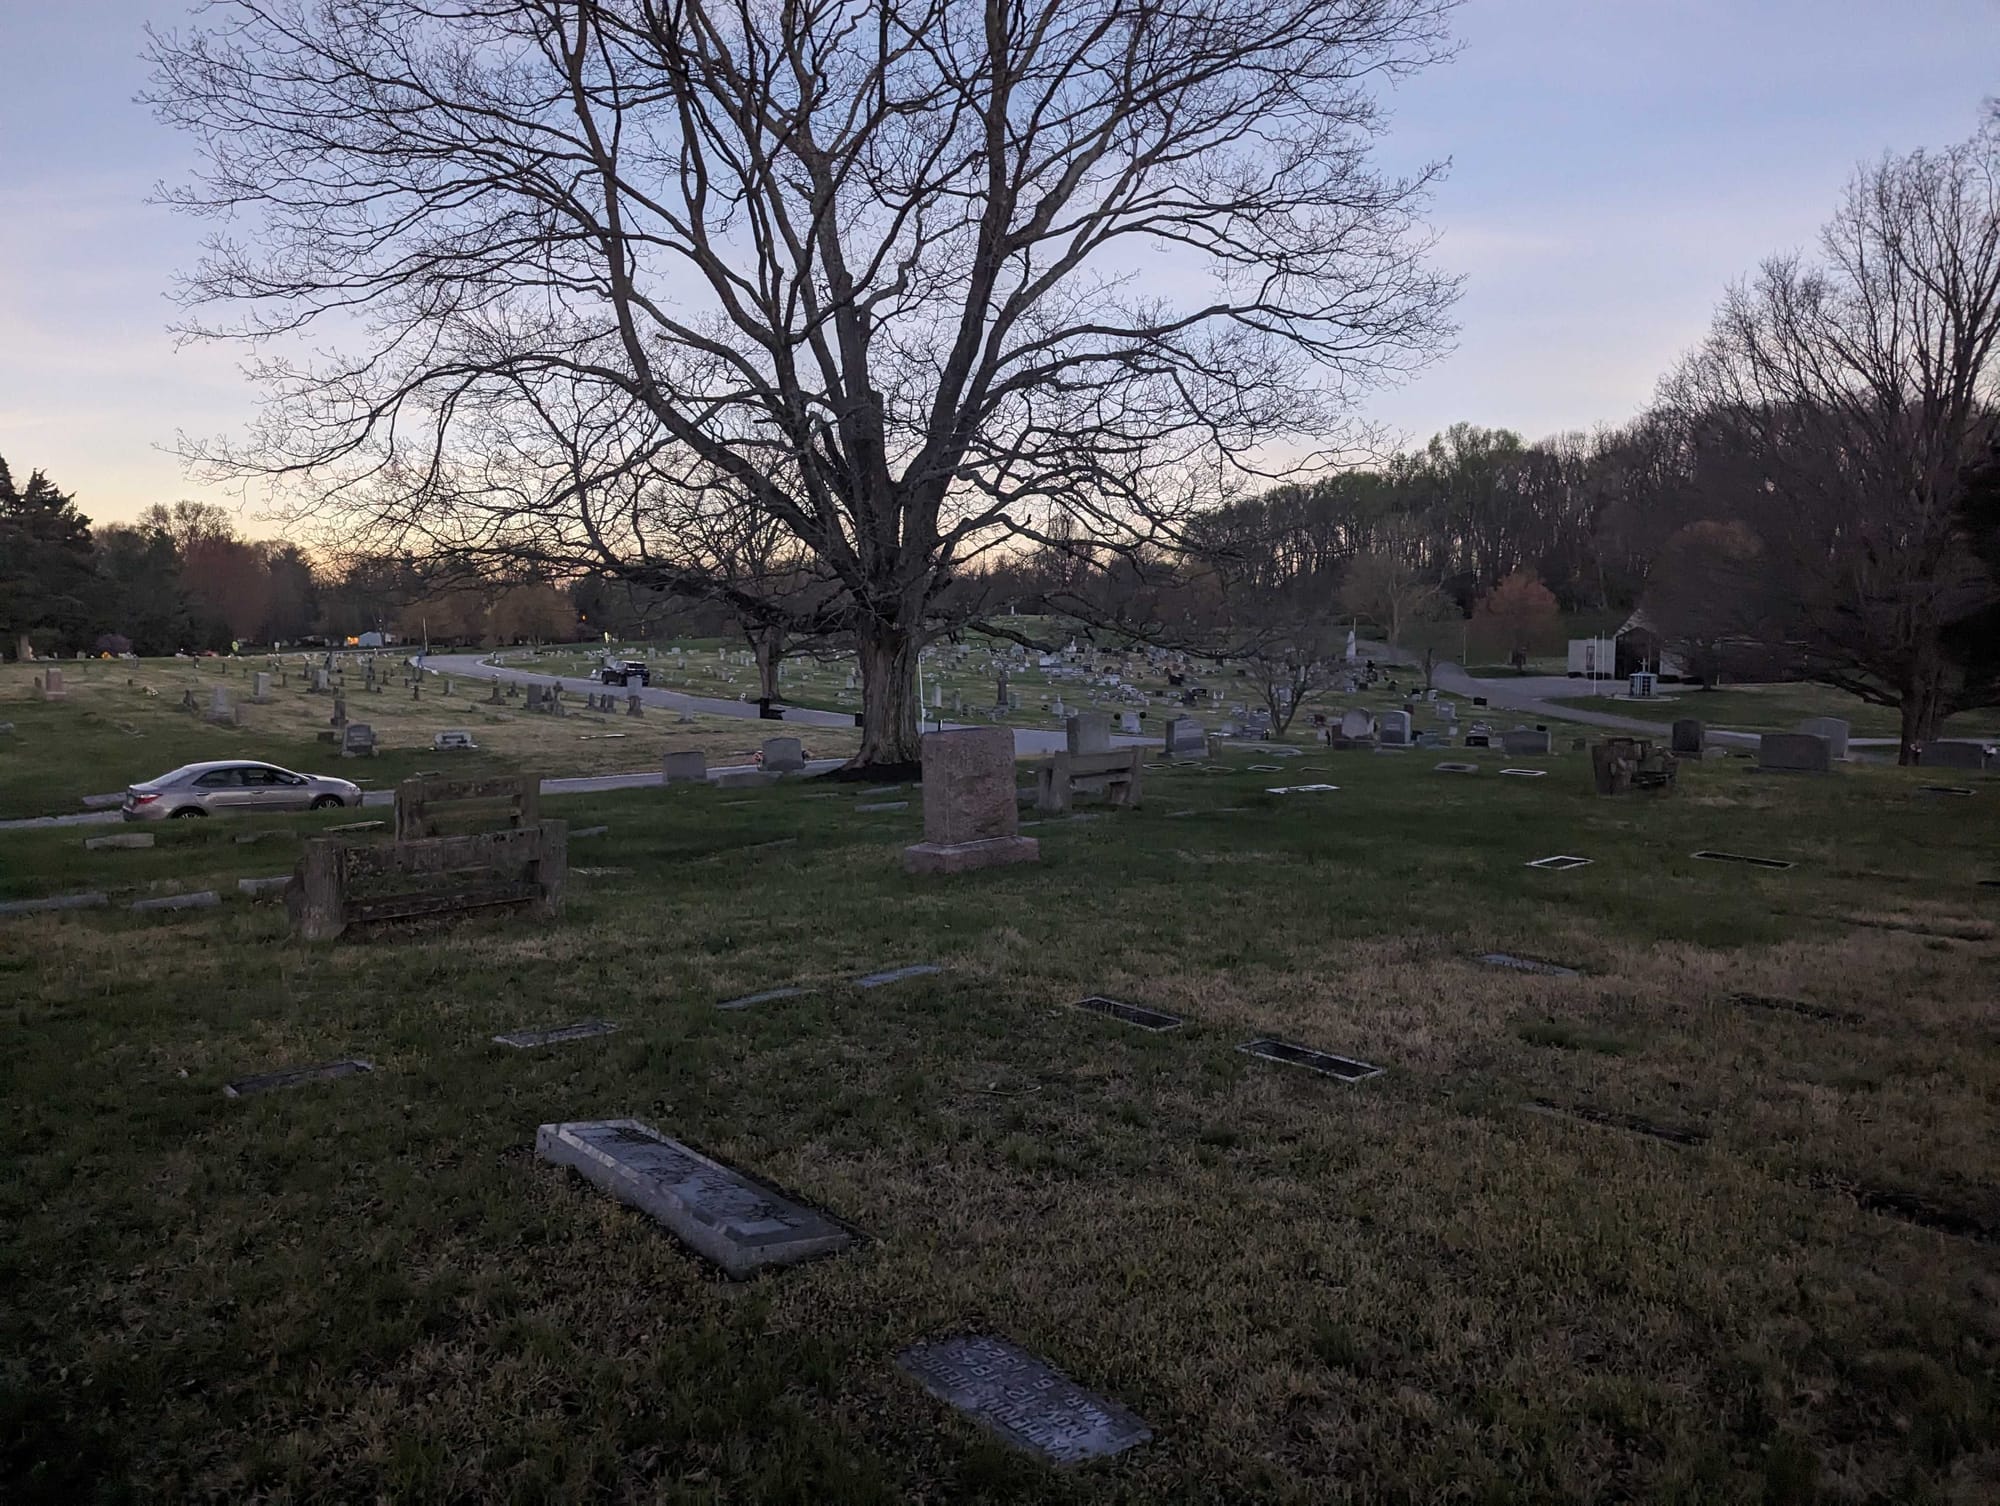 A cemetery seen during twilight of a solar eclipse